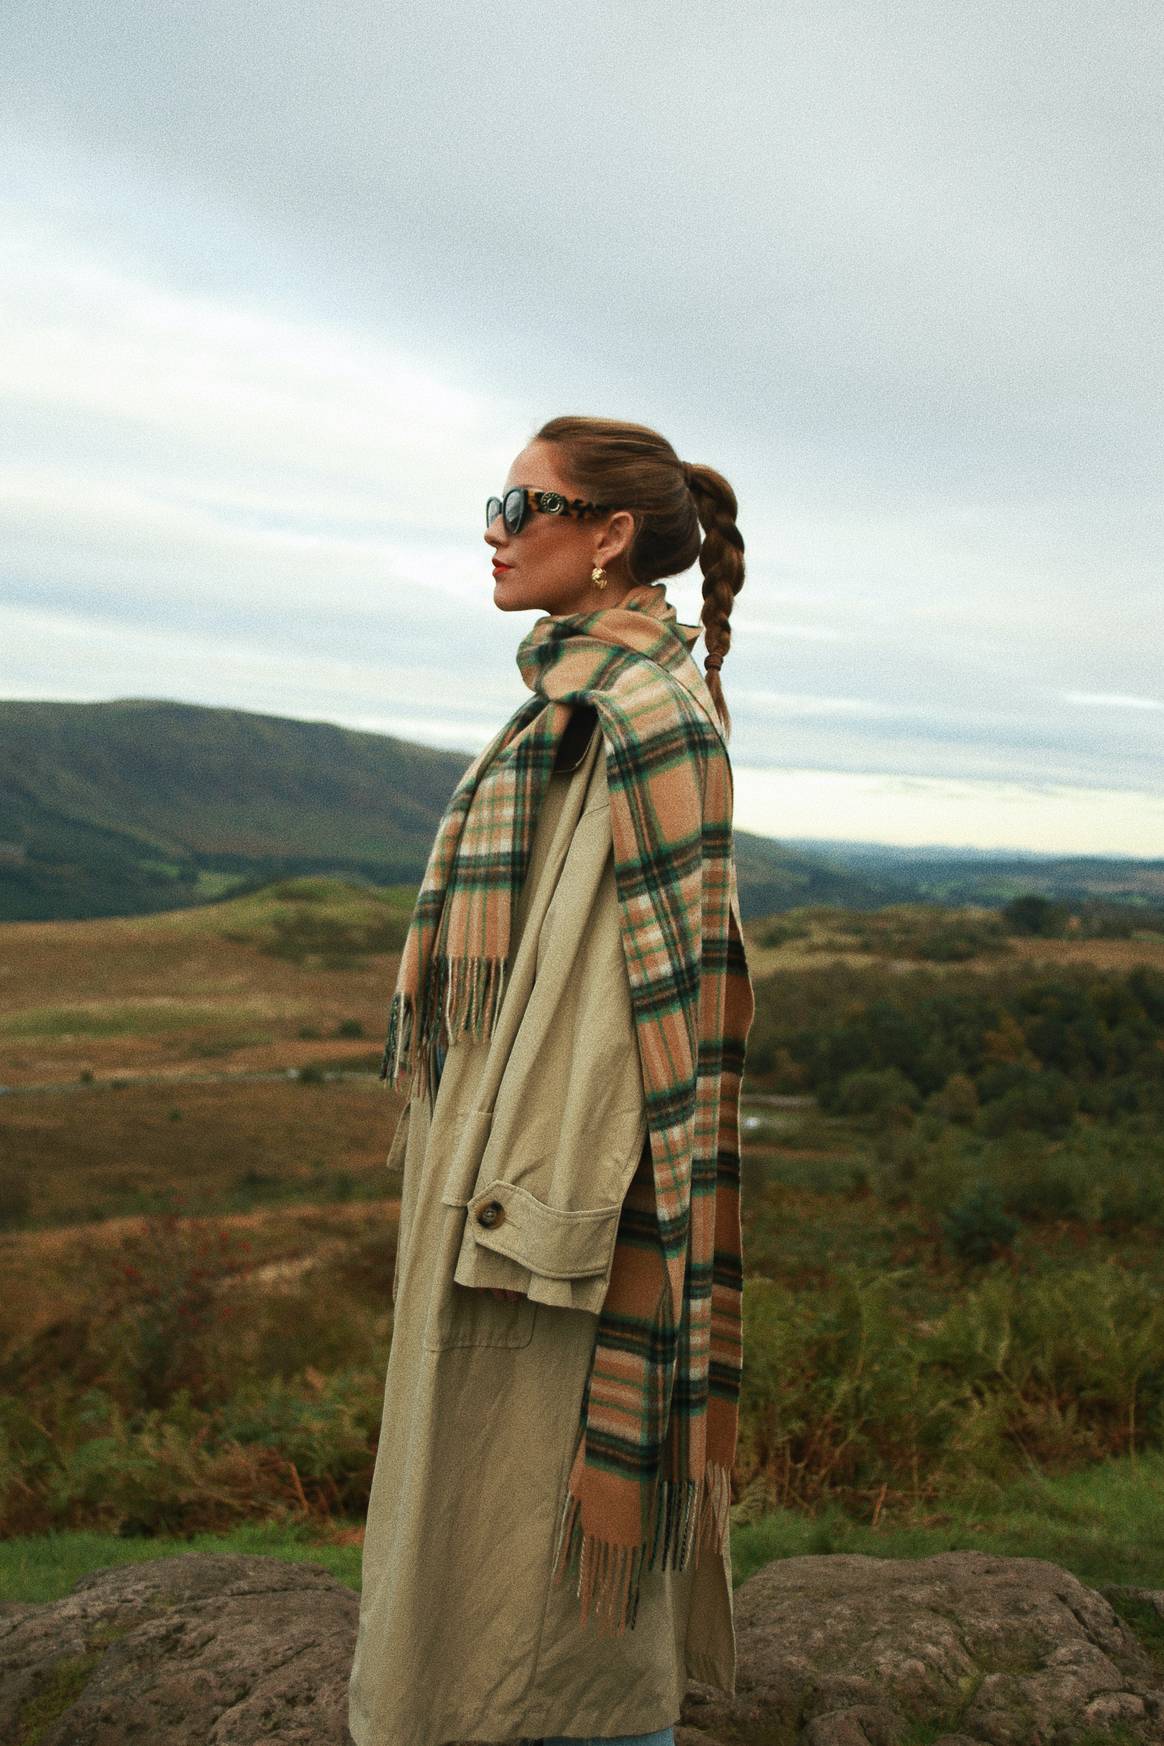 Image: courtesy of The Tartan Blanket Co.; The Little Magpie x The Tartan Blanket Co.